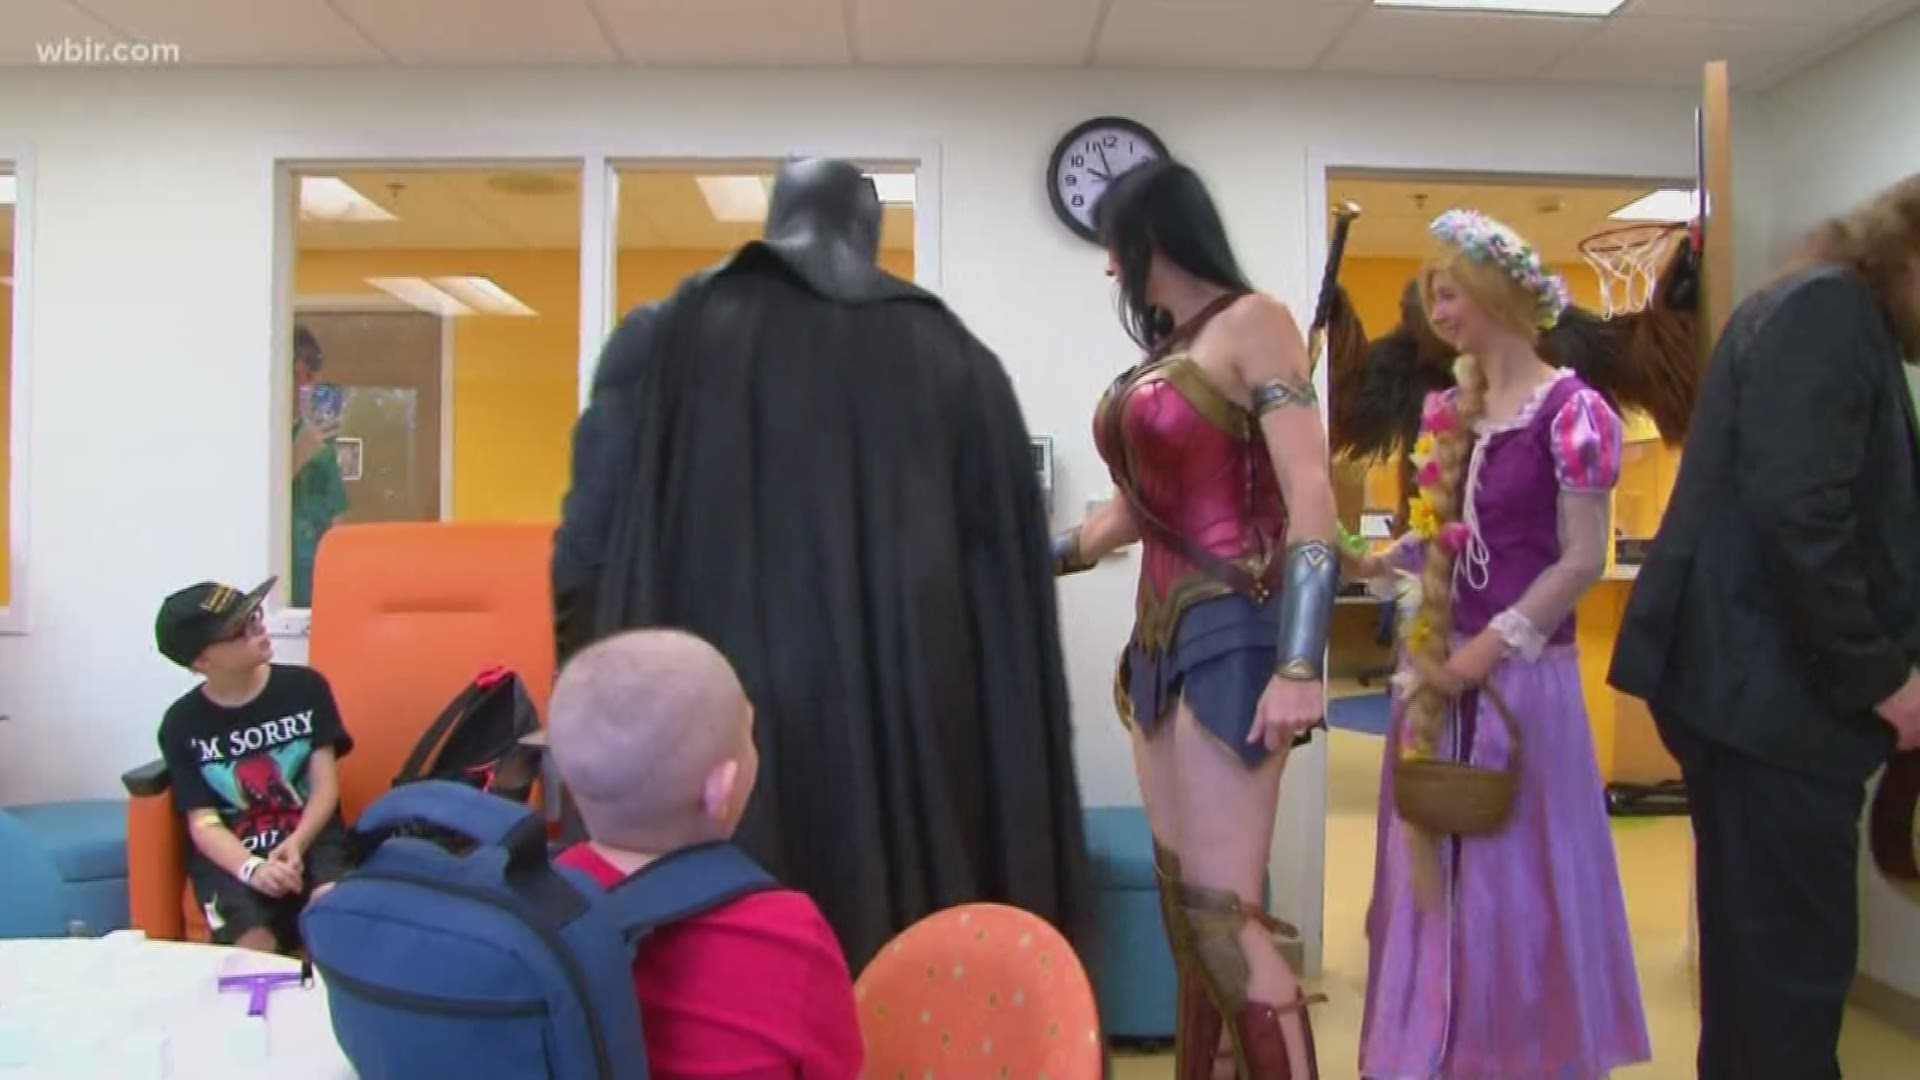 Batman, Superman, Chewbacca and many other superheroes brought some smiles today to East Tennessee Children's Hospital.